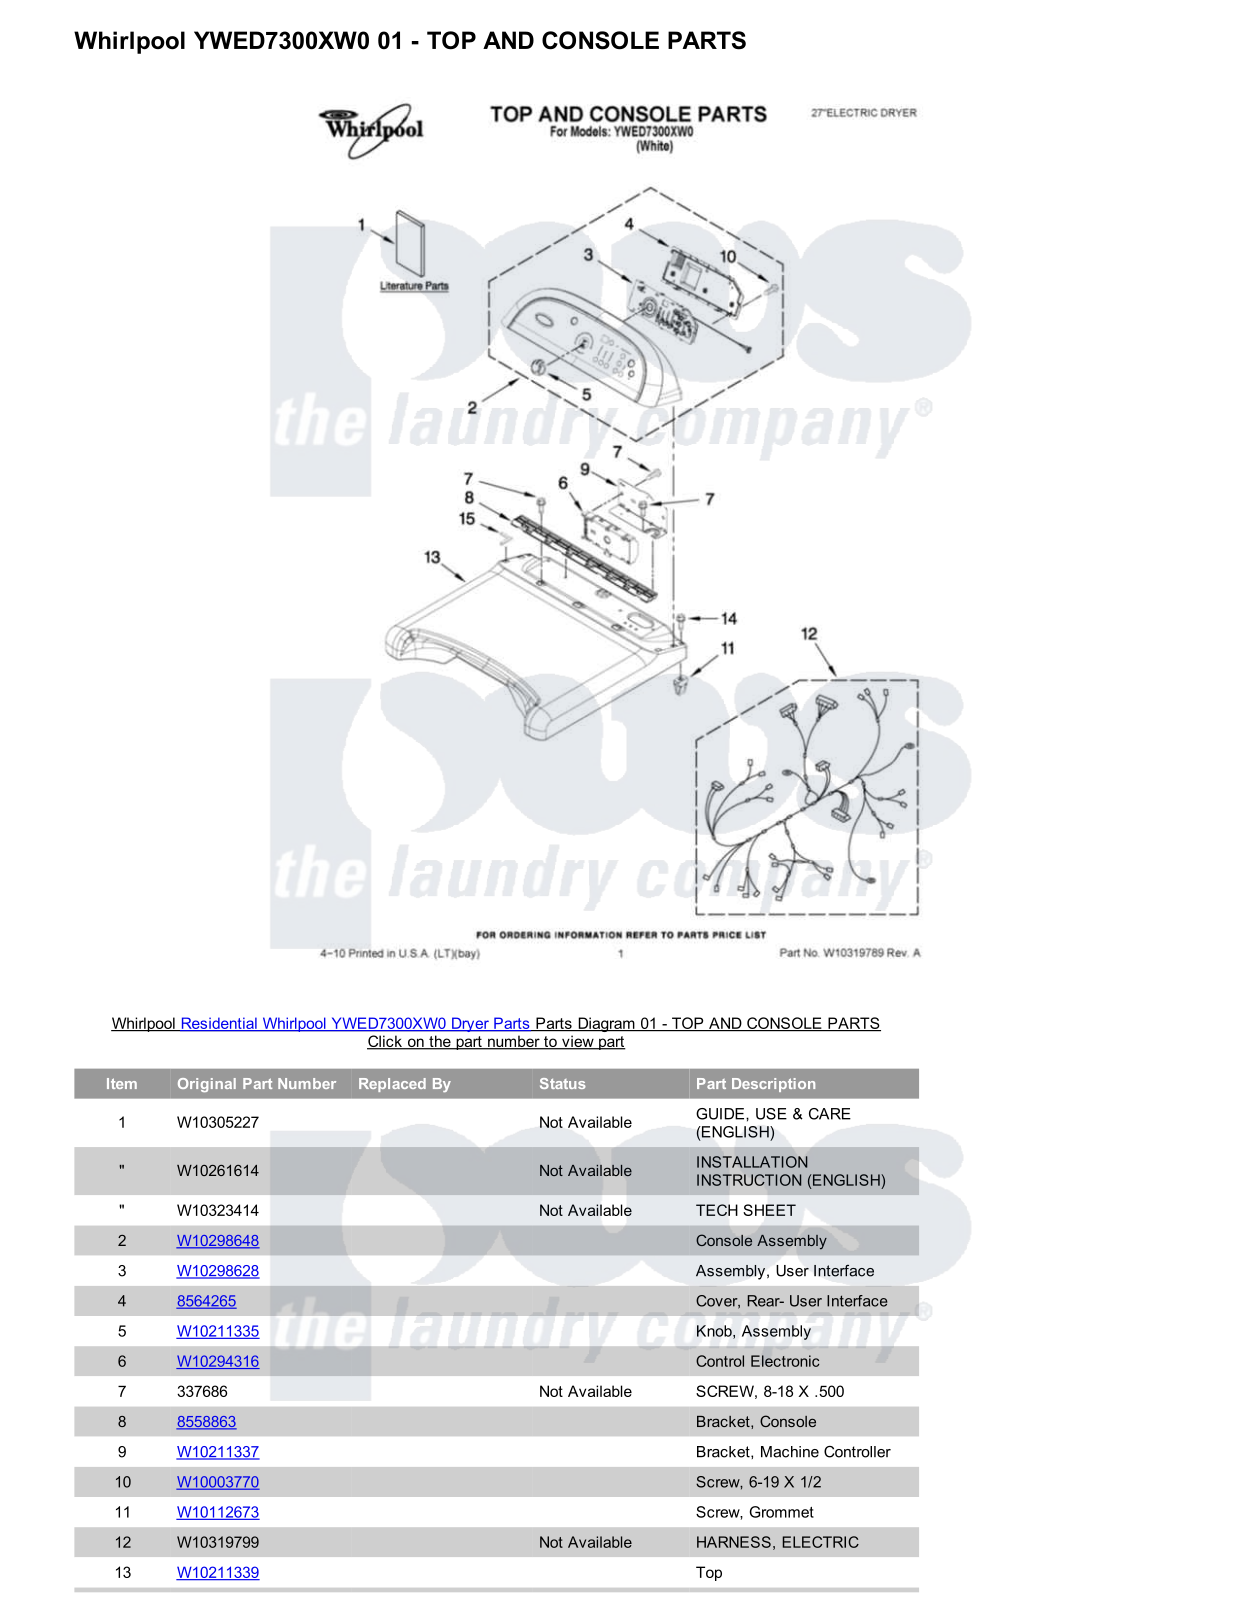 Whirlpool YWED7300XW0 Parts Diagram